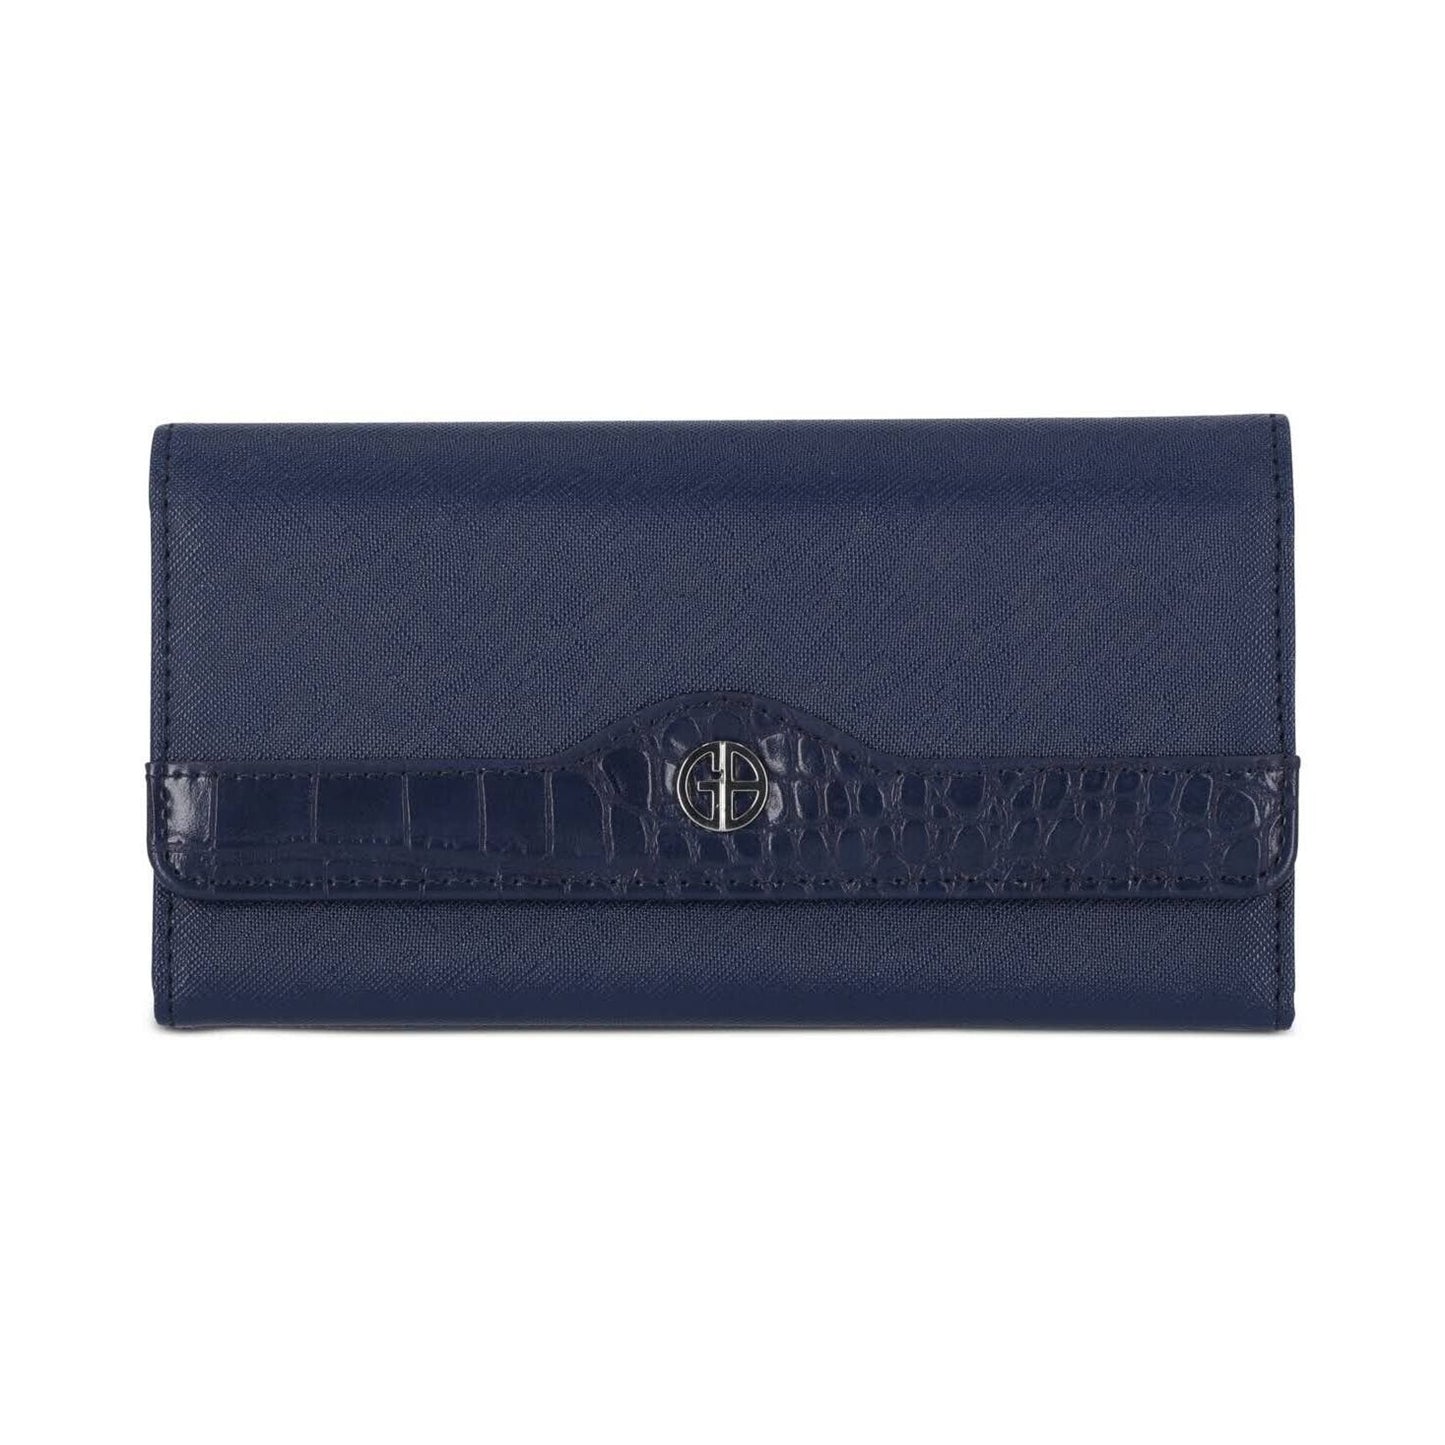 GIANI BERNINI Receipt Manager Wallet In Navy